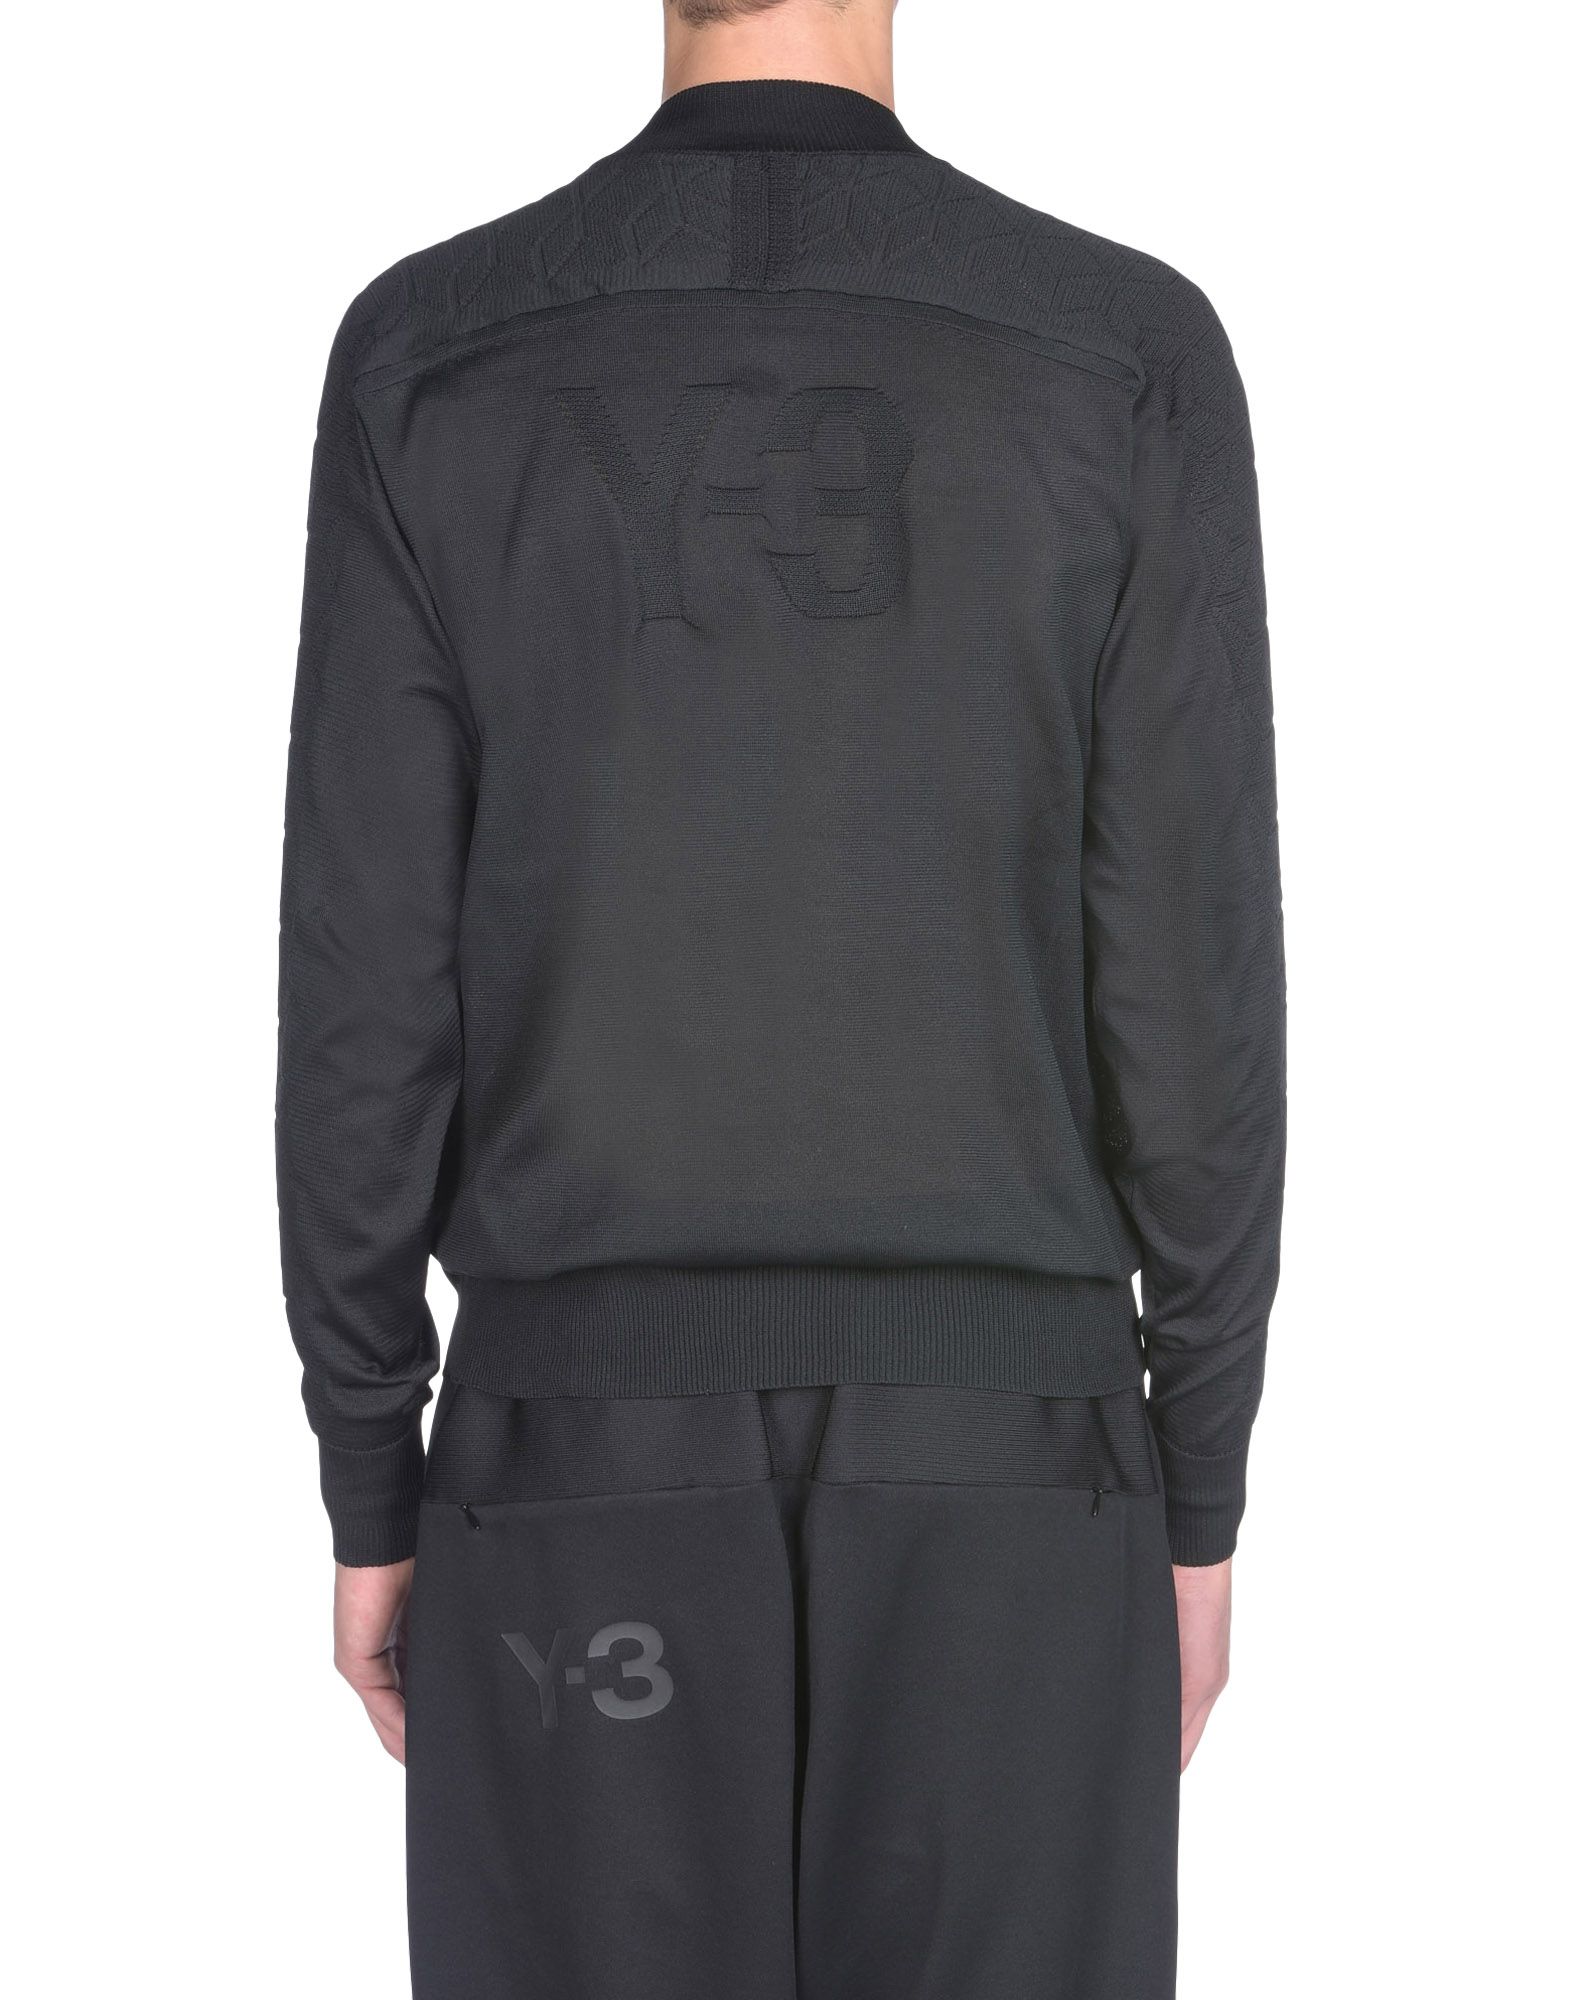 Y 3 KNIT BOMBER JACKET for Men | Adidas Y-3 Official Store